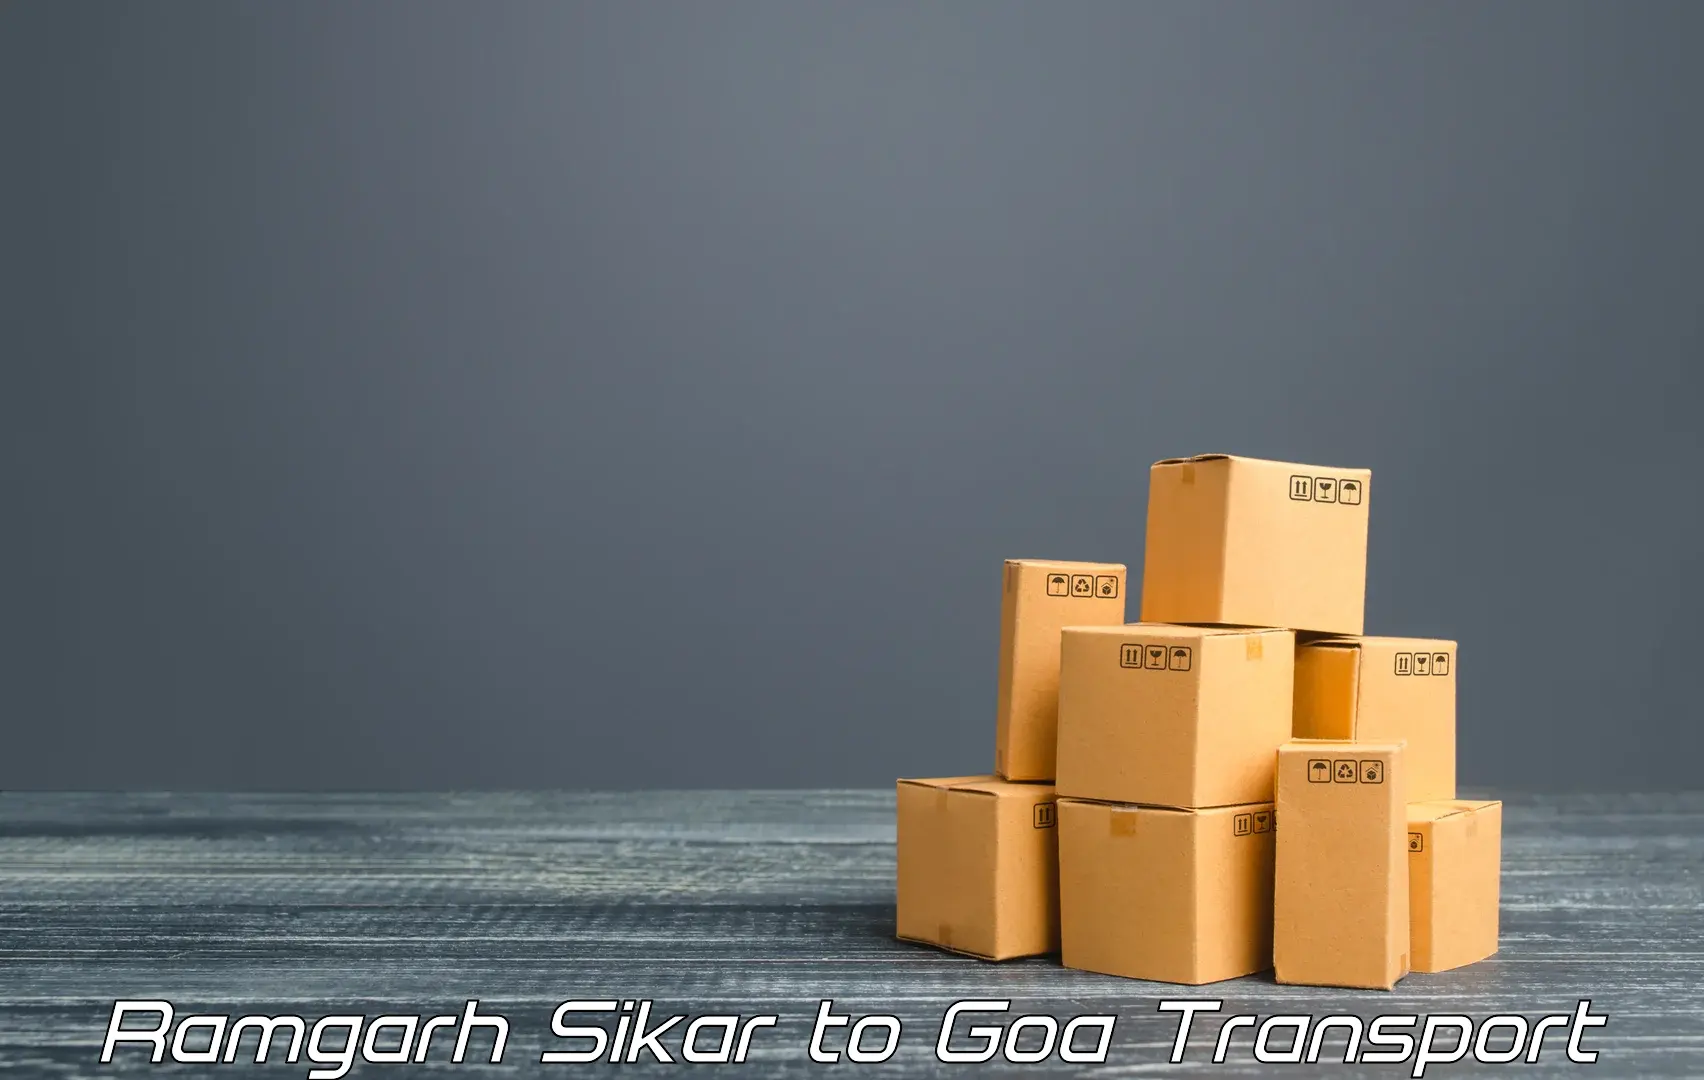 Interstate transport services Ramgarh Sikar to South Goa